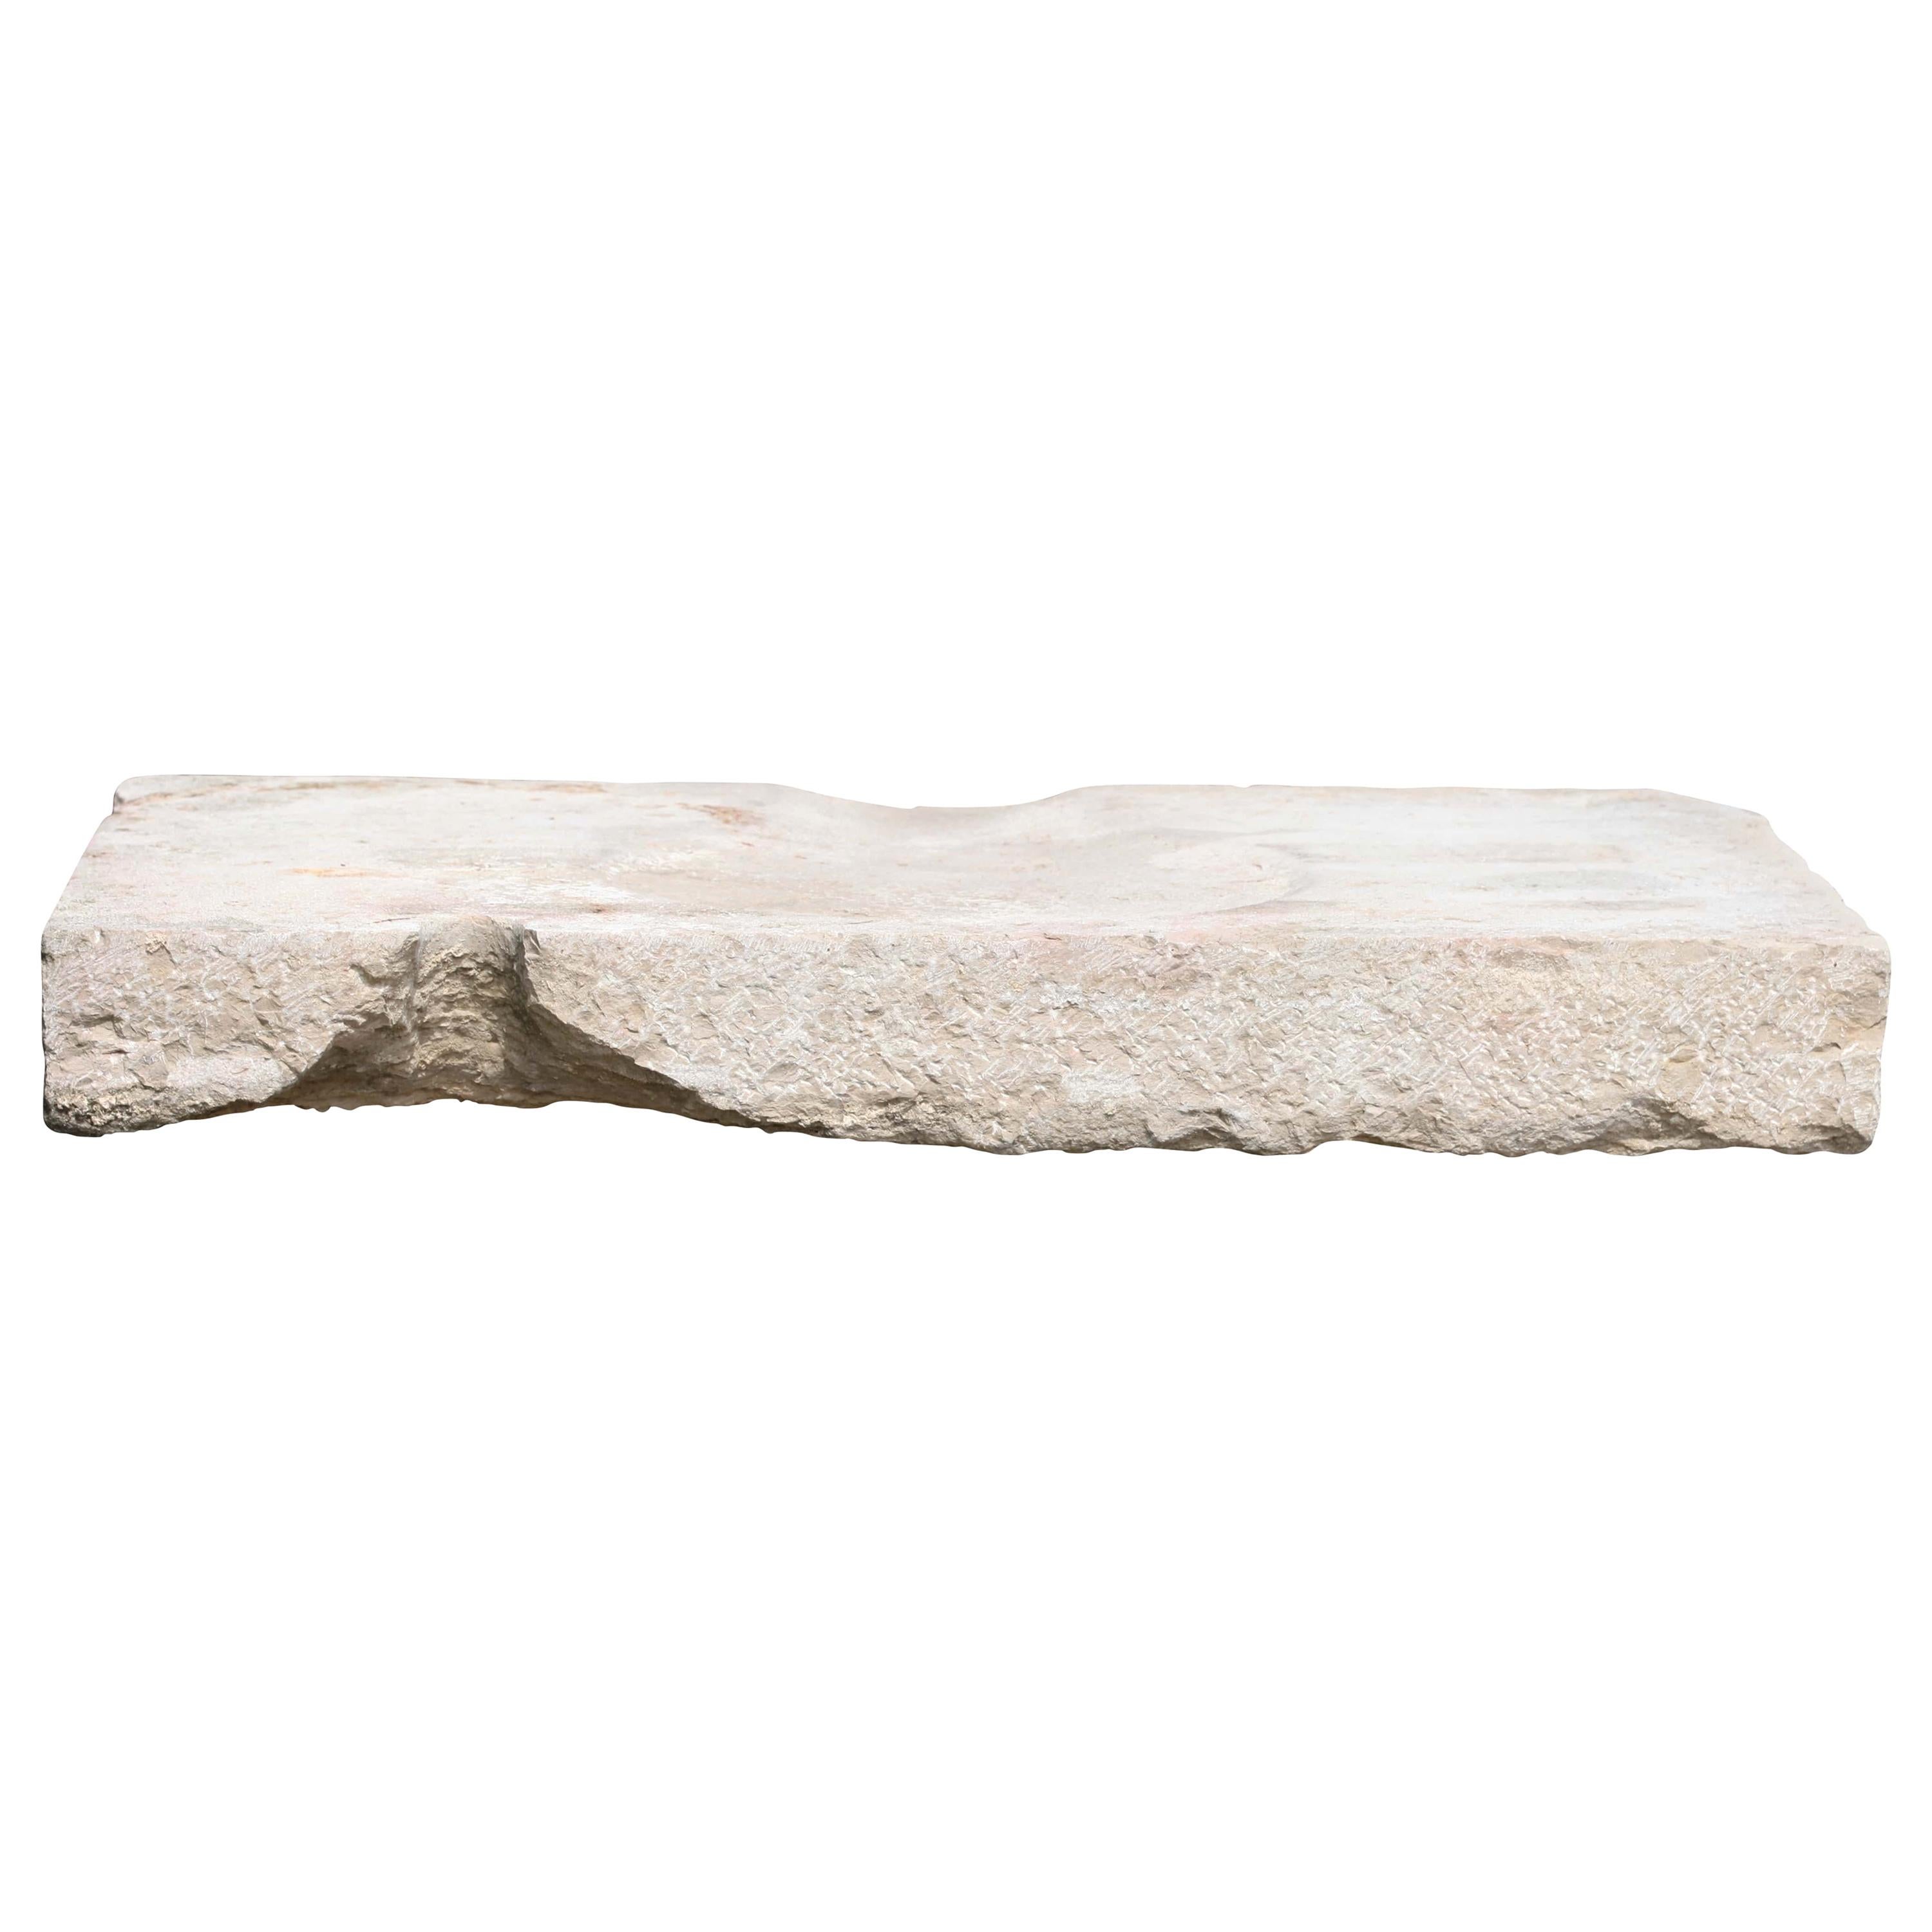 Reclaimed French Rustic Style Limestone Architectural Element For Sale 2